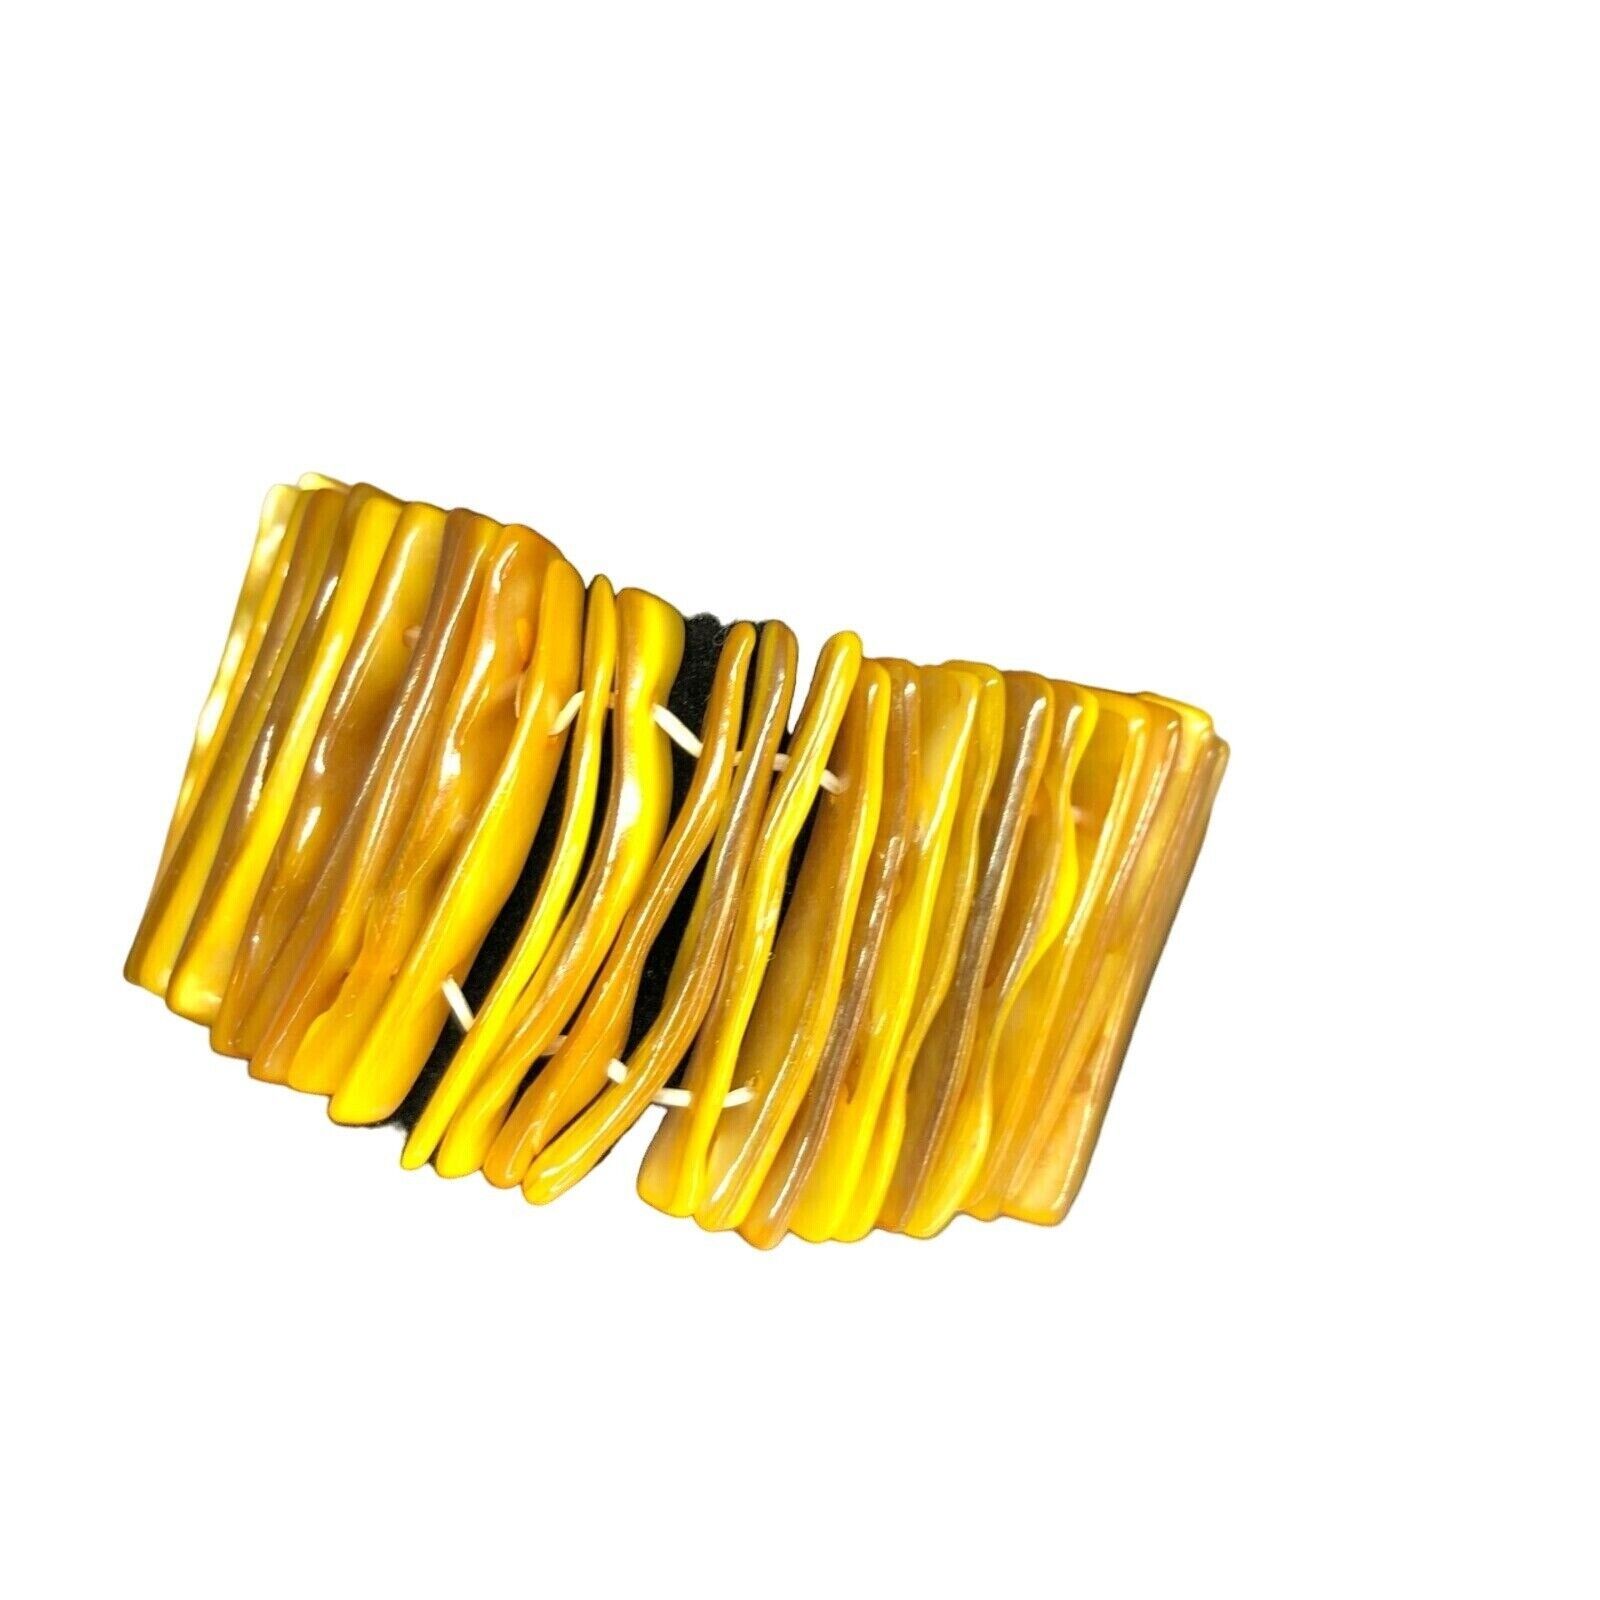 Nicole's Bold Yellow Long Beaded Stretch Bracelet 6" Unstretched NWT - $10.89